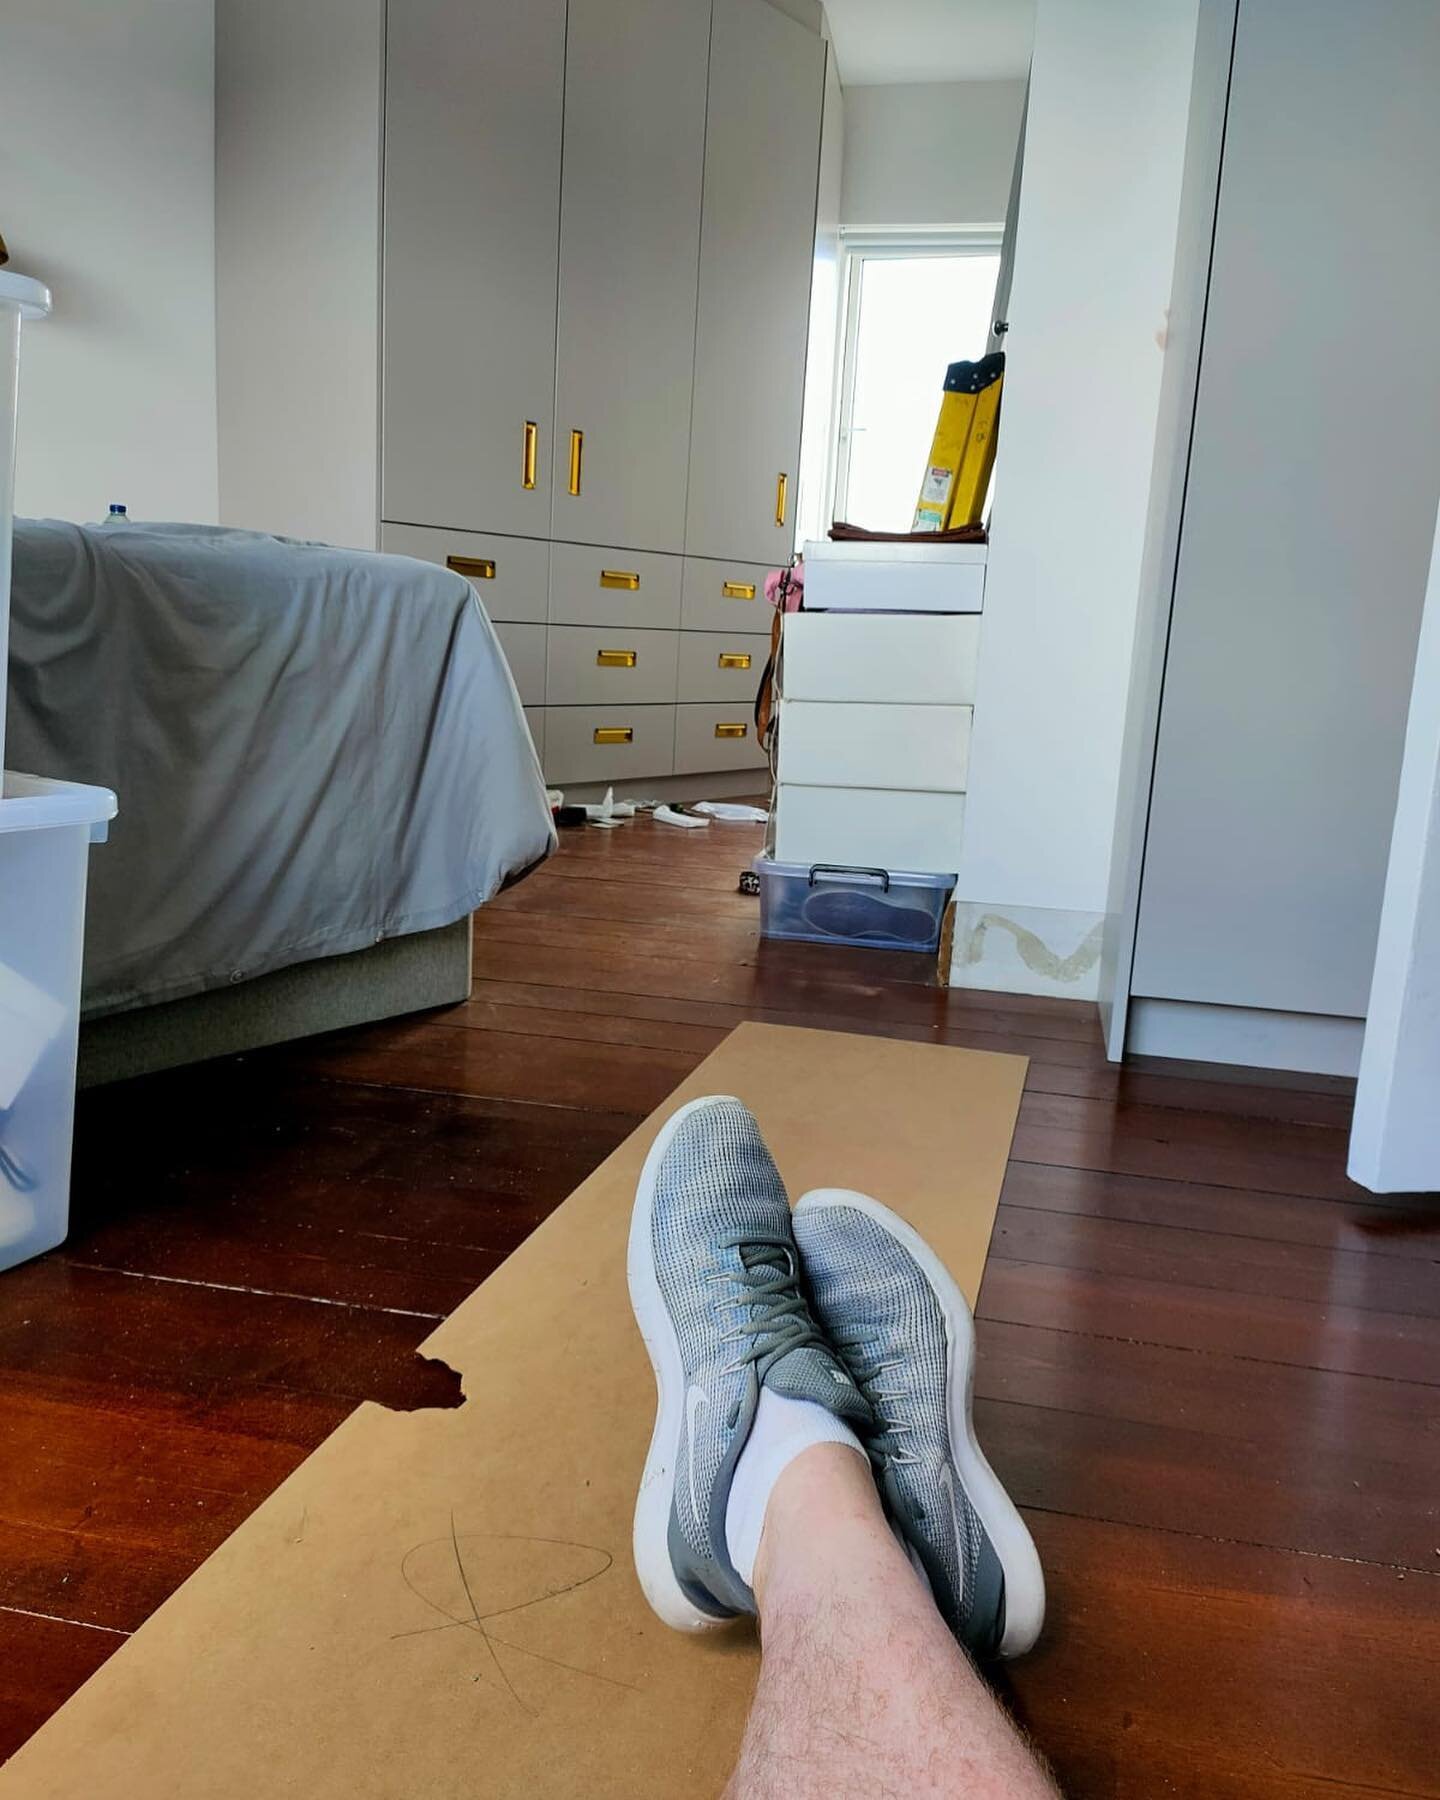 When you ask for photo updates for insta and he&rsquo;s got his feet up @robbie_bourke 🤣 #smallbusiness #socialmedia #homerenovation #bespokejoinery #smallbusinesssocialmedia #tksdesigns